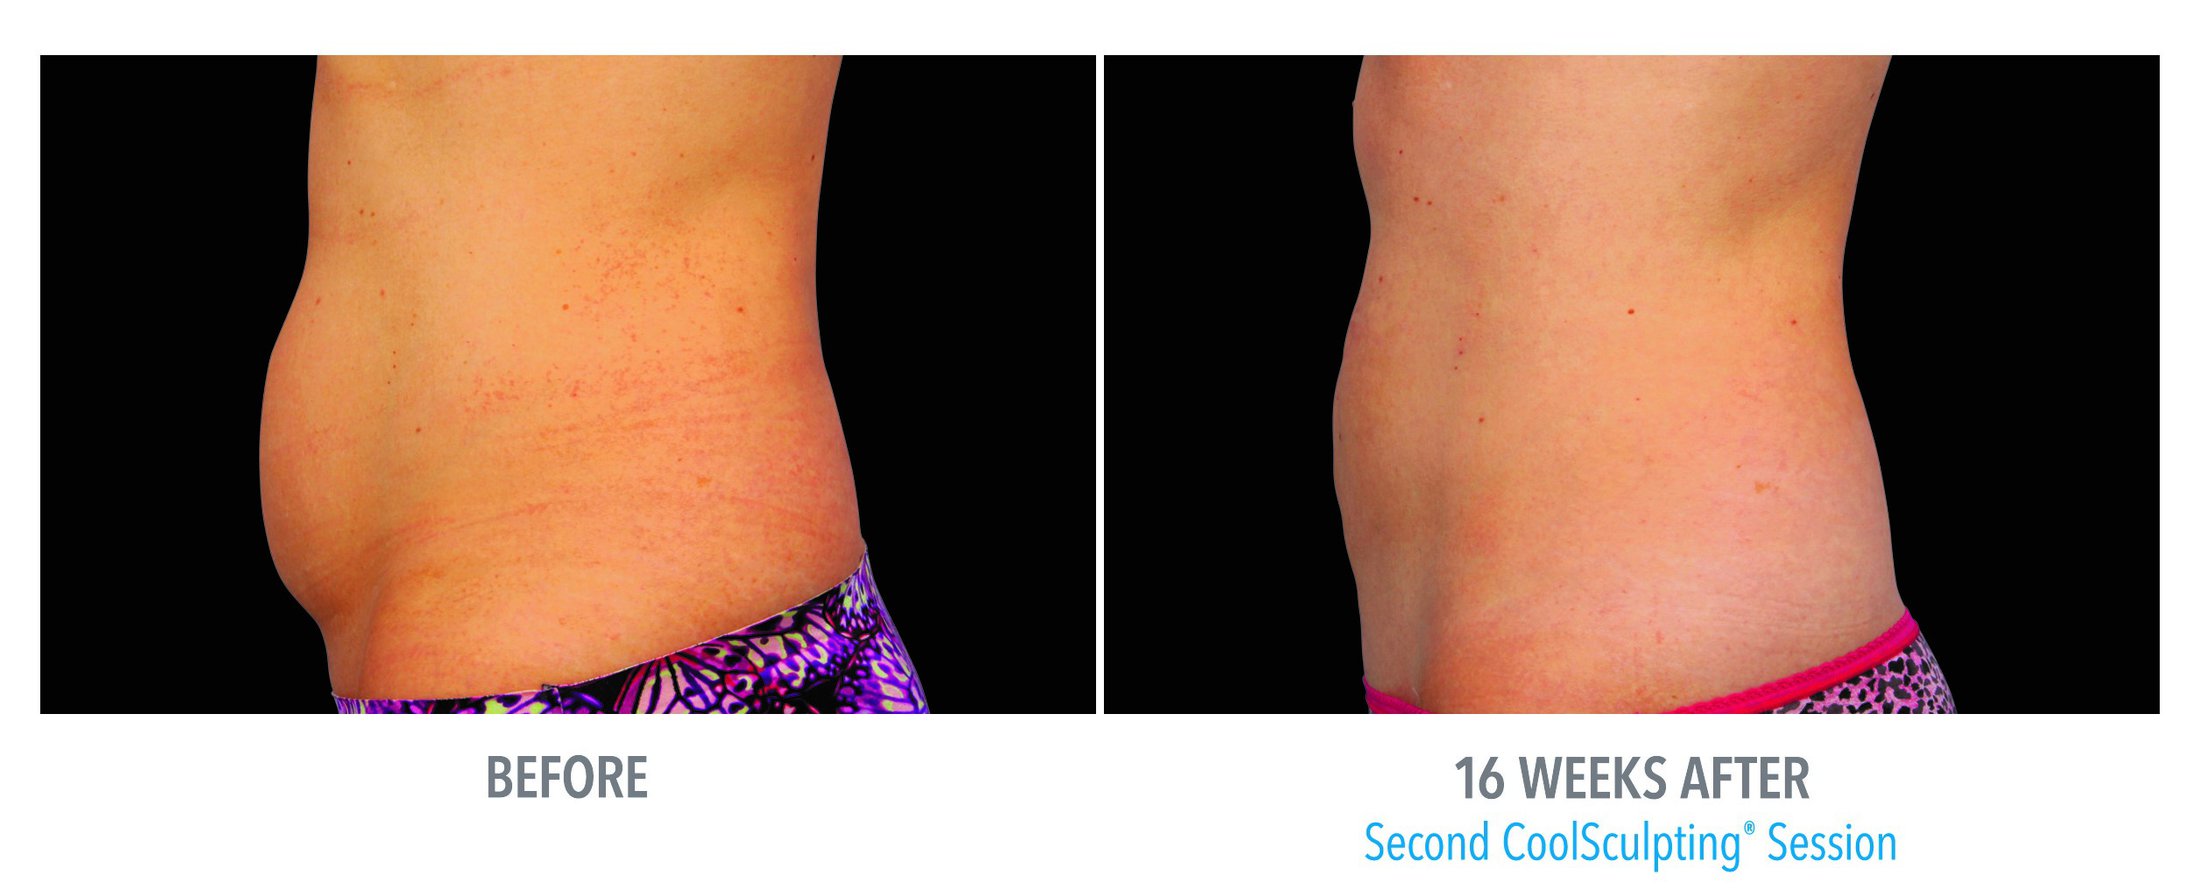 Coolsculpting Before and After Feature 1